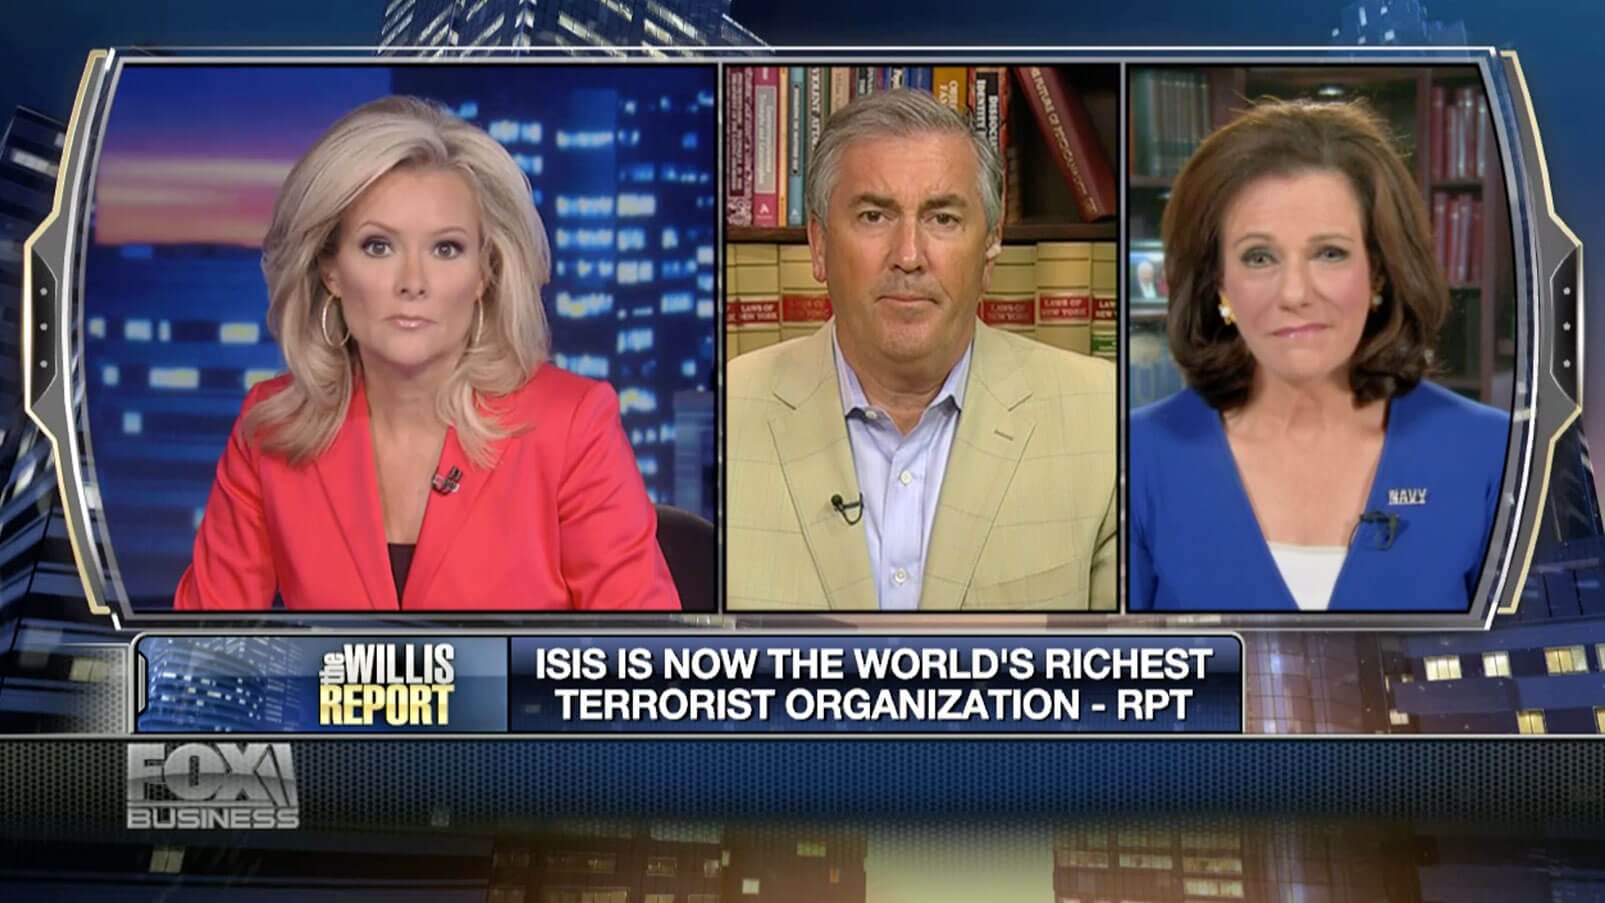 Michael Balboni Discusses the Growing Threat of ISIS on FOX News – Willis Report 08-28-14